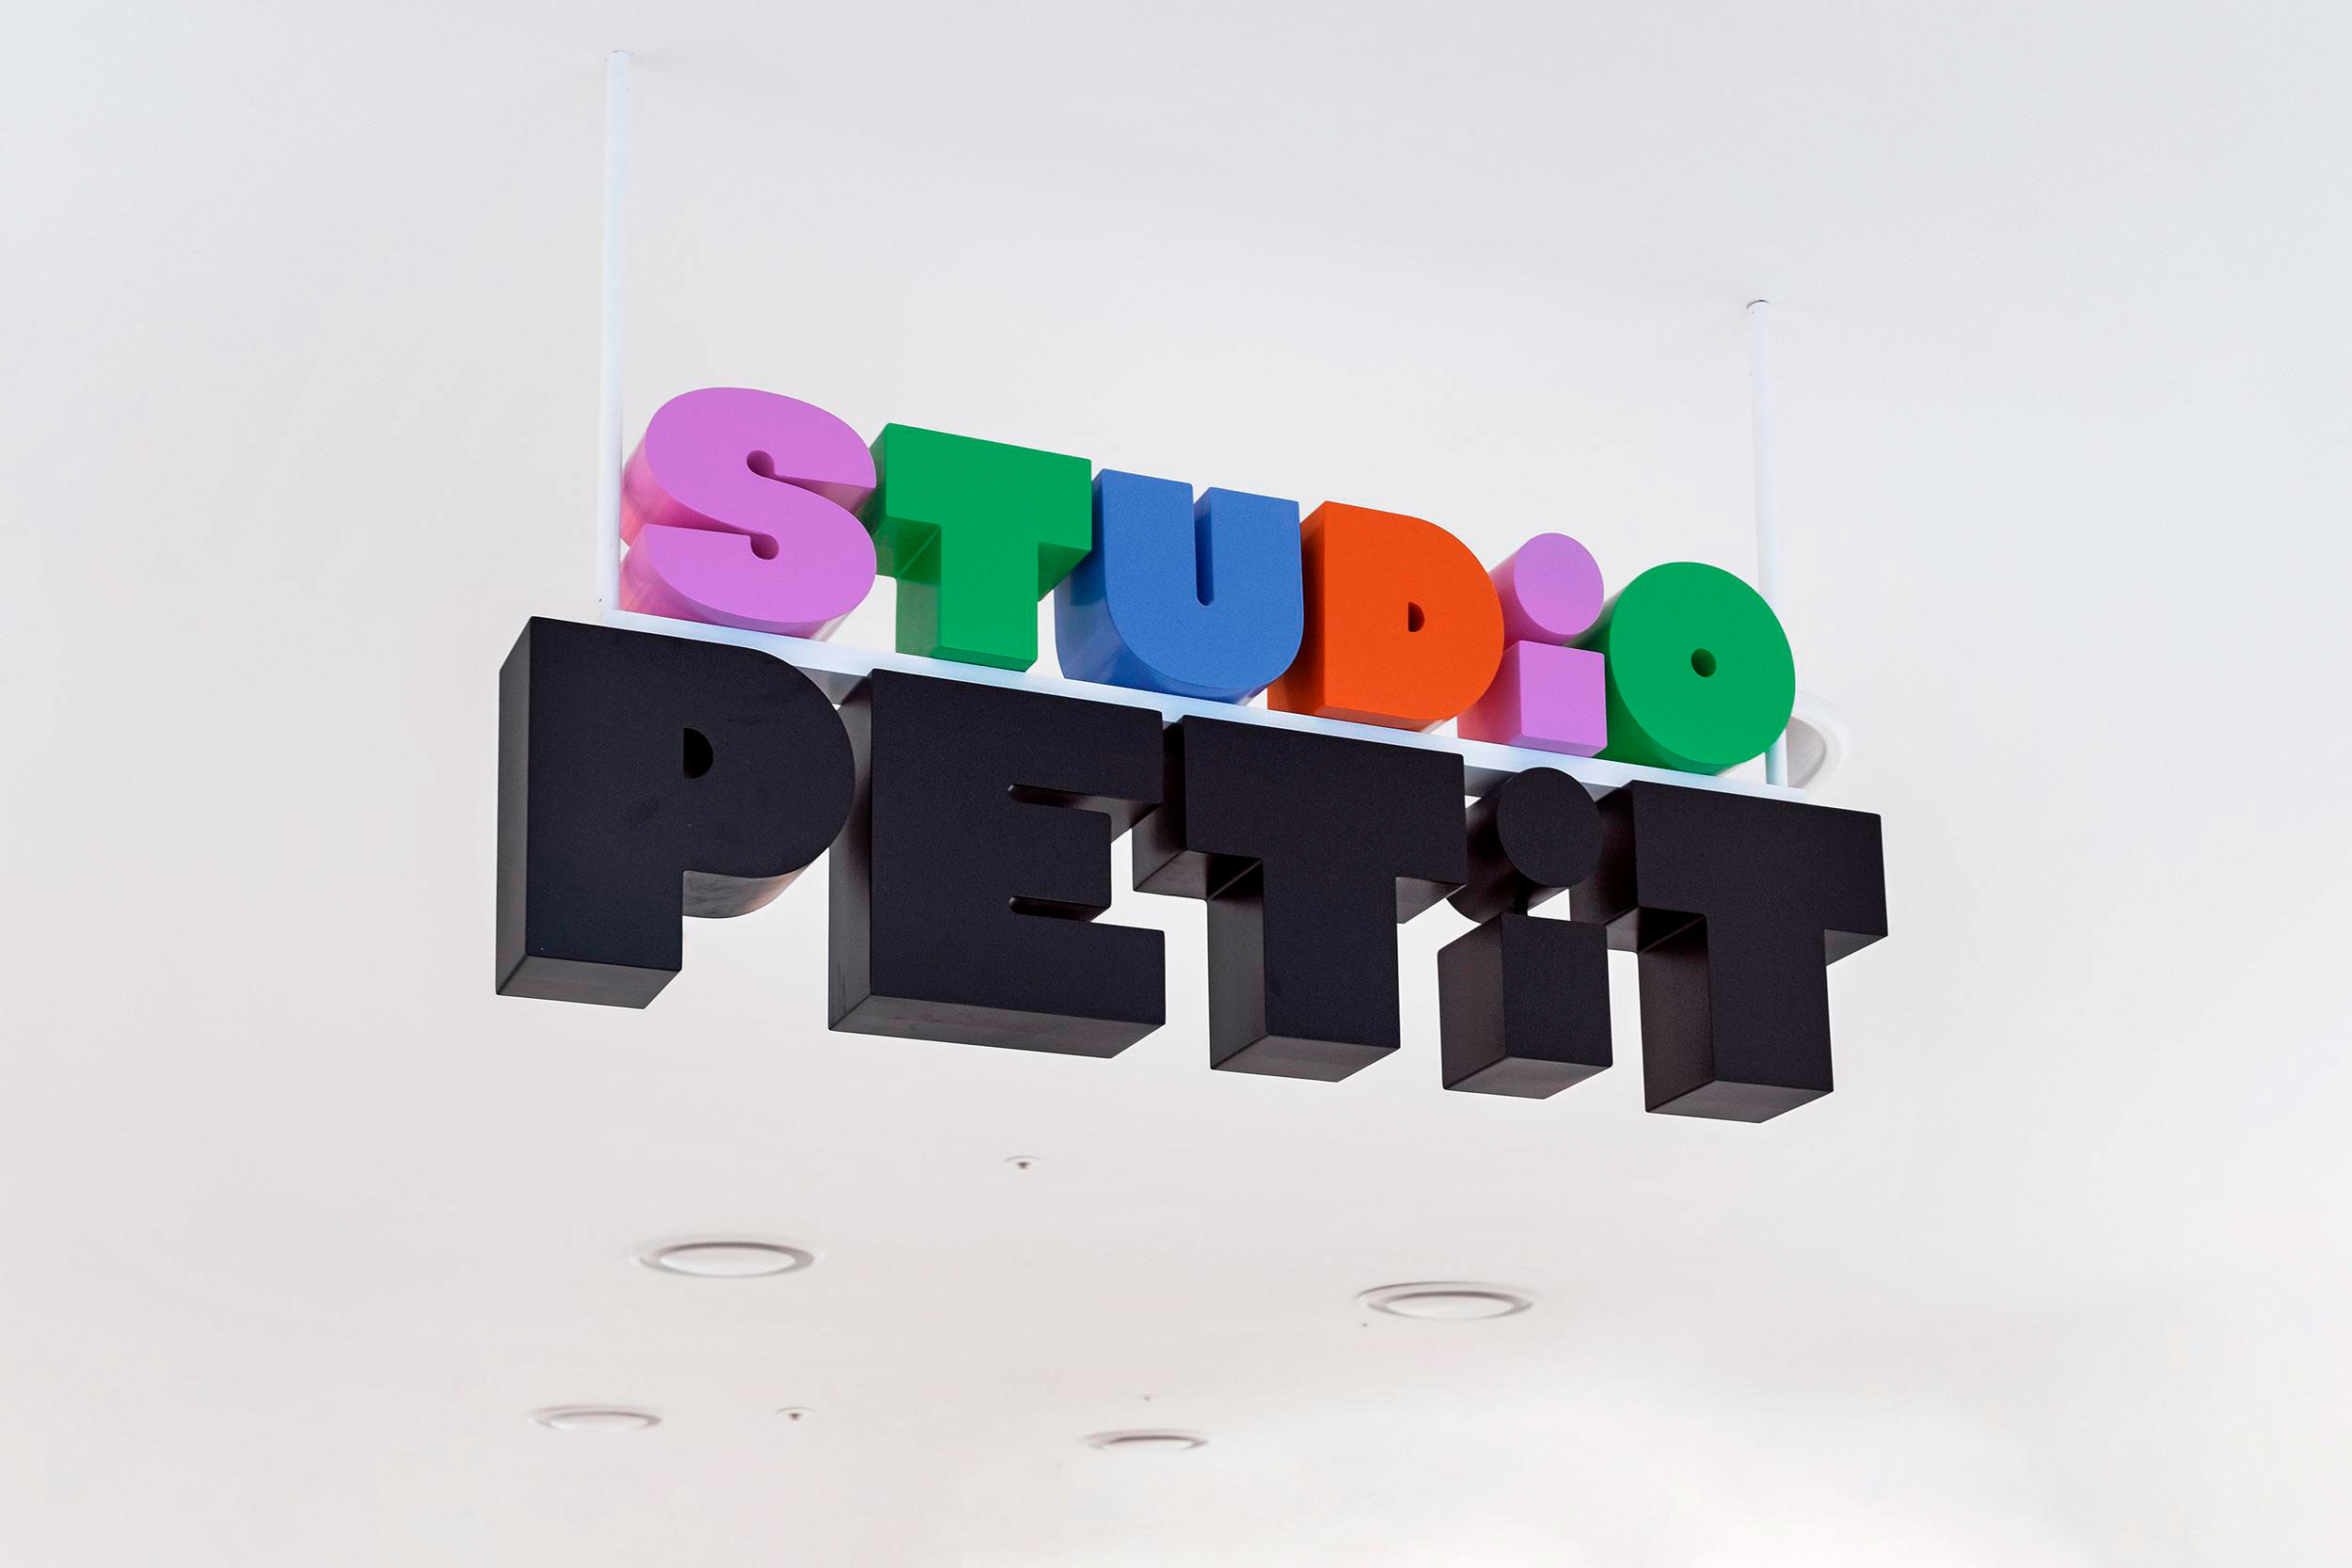 Logotype and signage for toy department Petit Planet at South Korean department store Hyundai. Designed by Studio fnt.